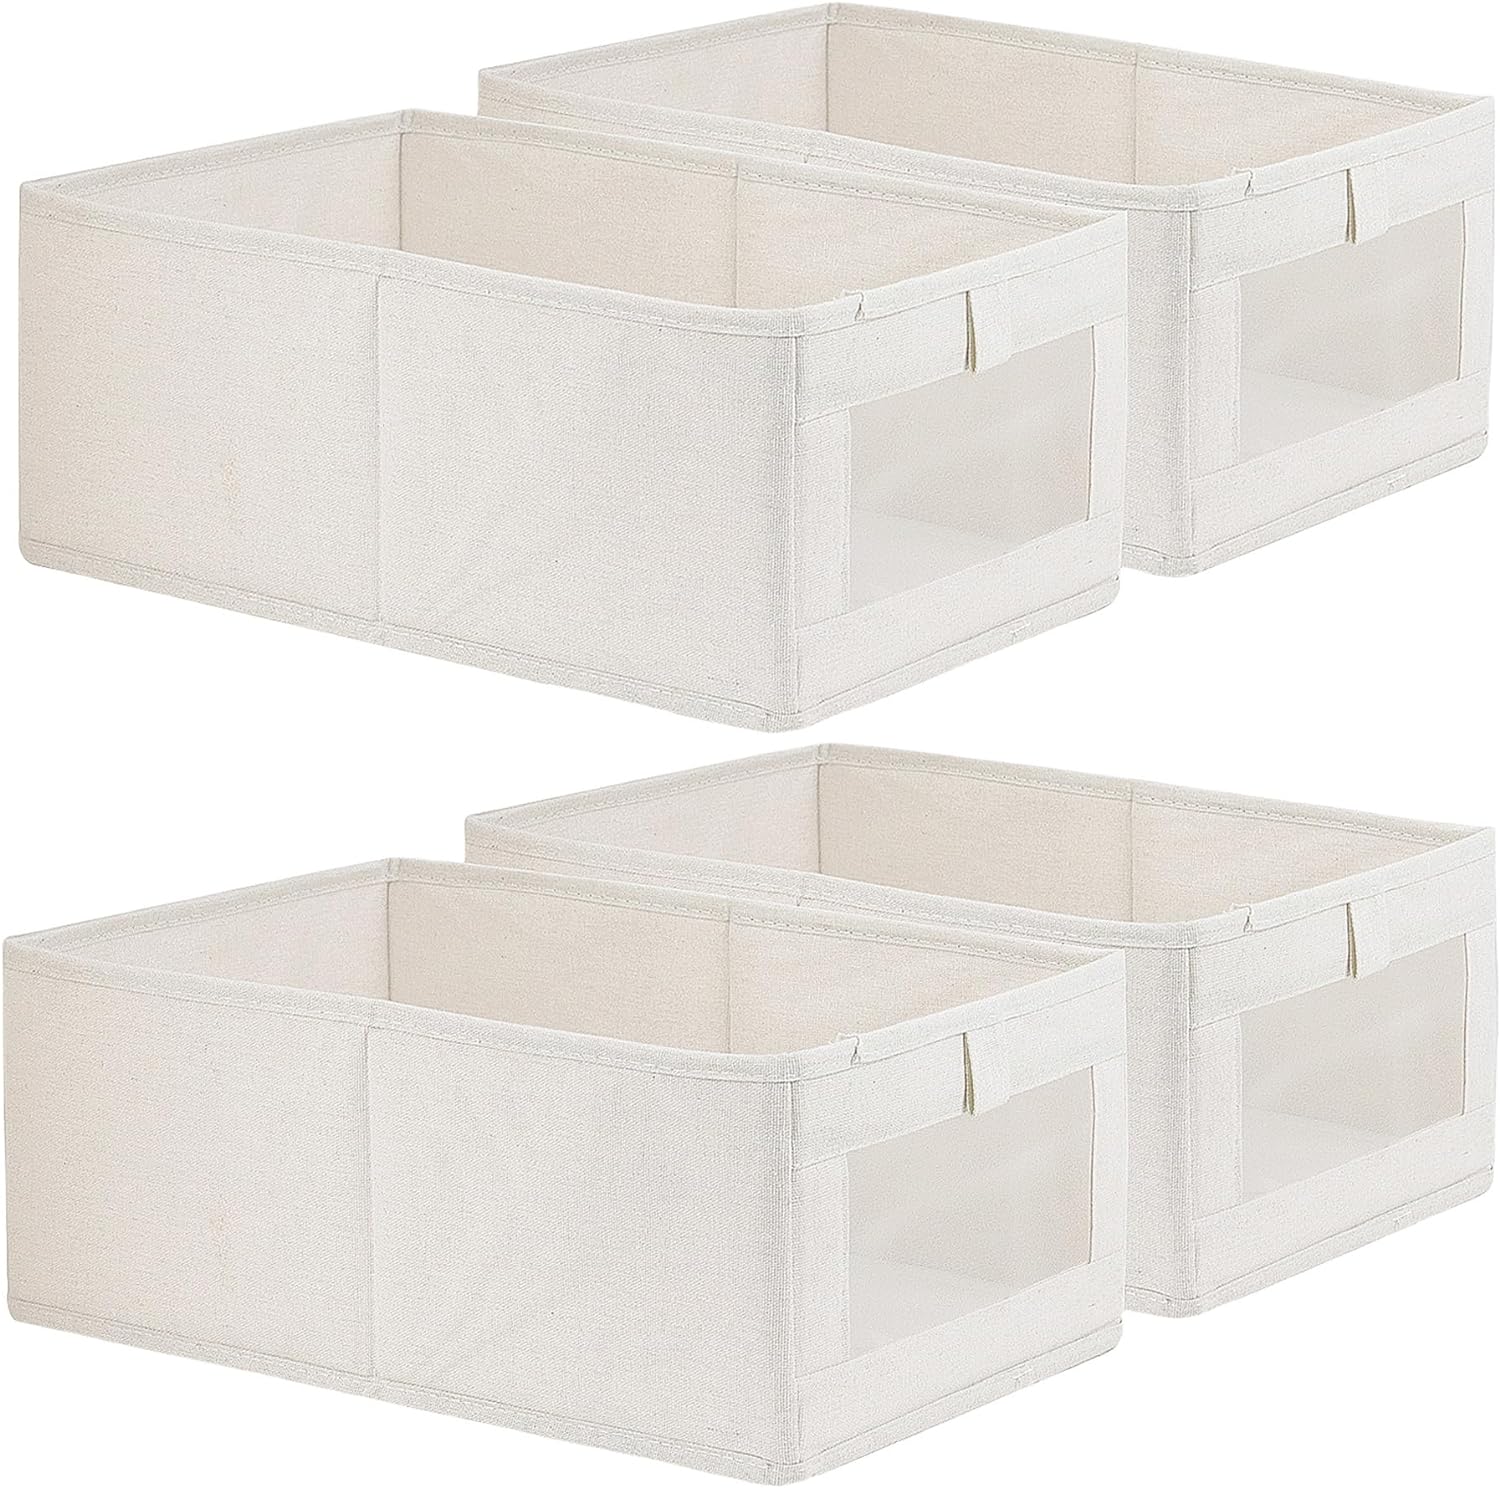 4 Pack Linen Storage Bins, Storage Containers for Organizing Clothing, Jeans, Toys, Books, Shelves, Closet, Wardrobe - Closet Organizers and Storage, Large Storage Boxes Baskets with Window